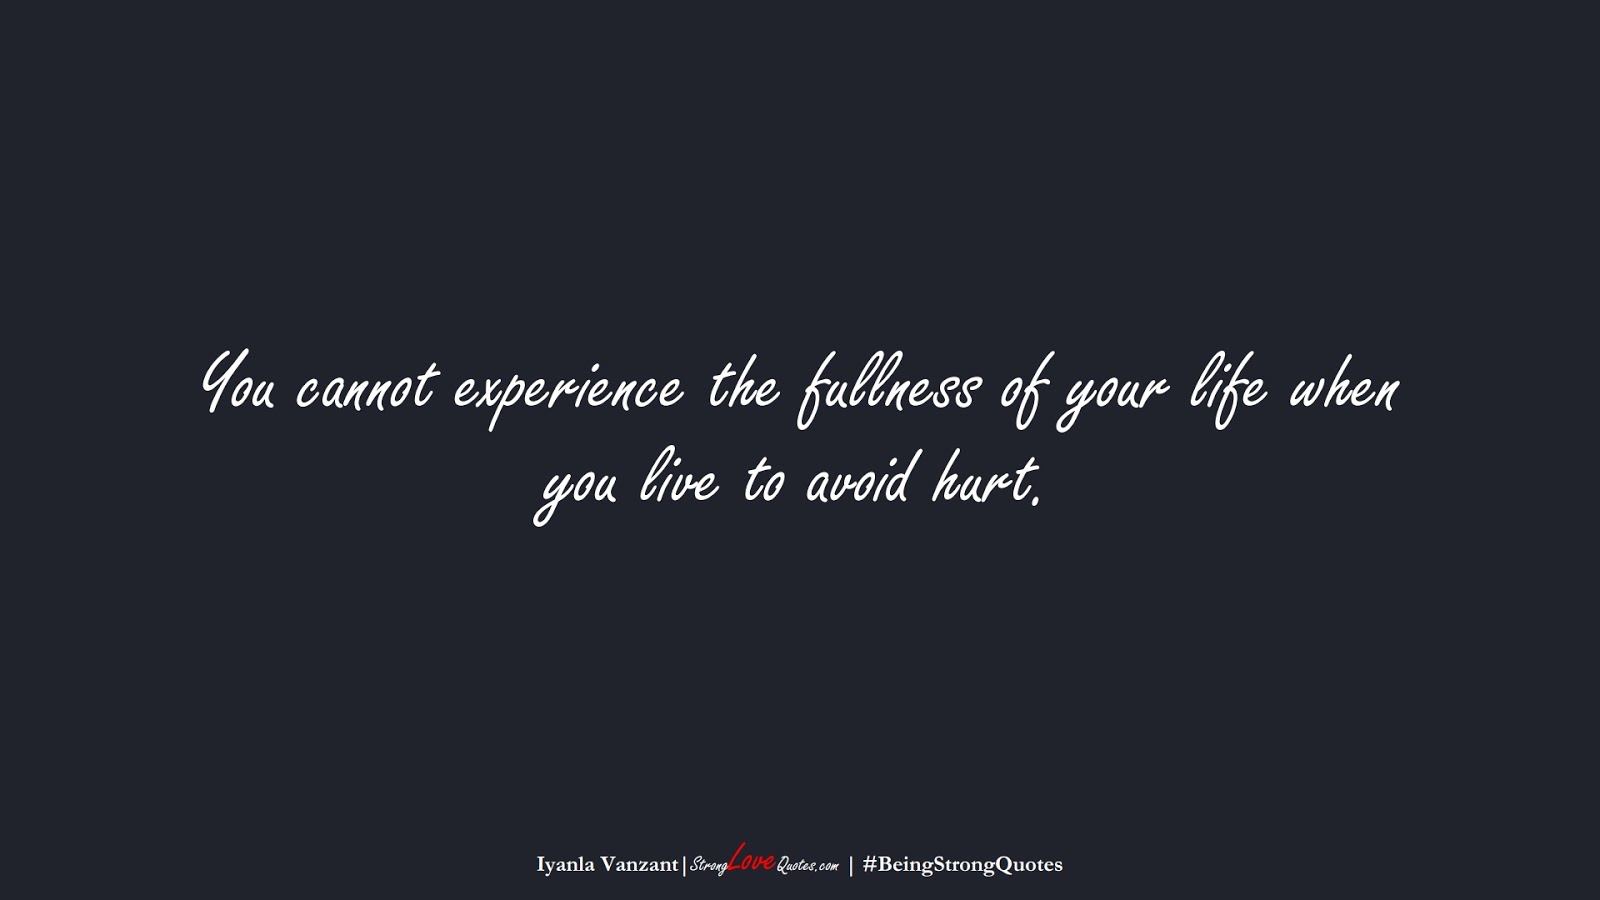 You cannot experience the fullness of your life when you live to avoid hurt. (Iyanla Vanzant);  #BeingStrongQuotes